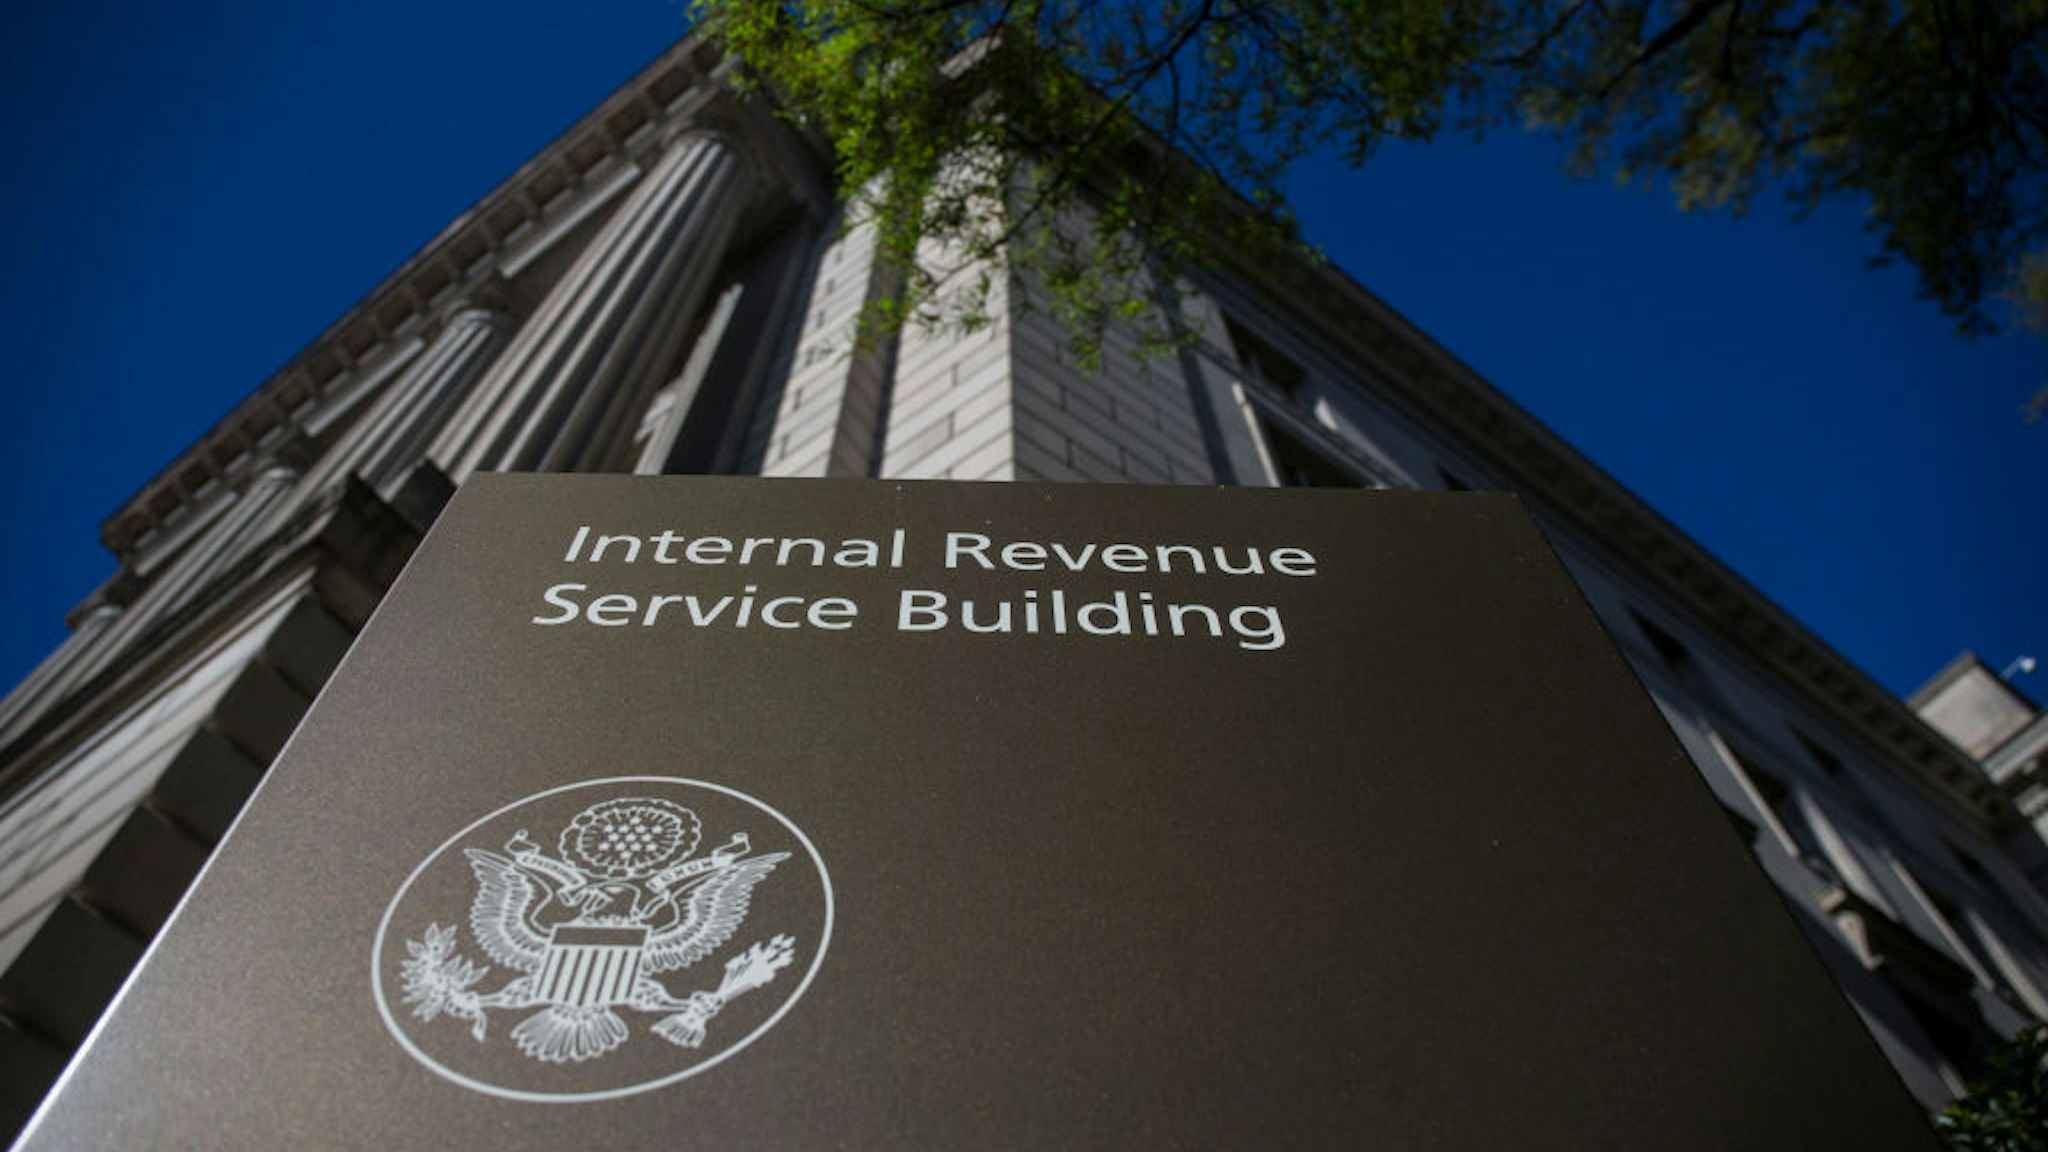 The Internal Revenue Service (IRS) building stands on April 15, 2019 in Washington, DC. April 15 is the deadline in the United States for residents to file their income tax returns